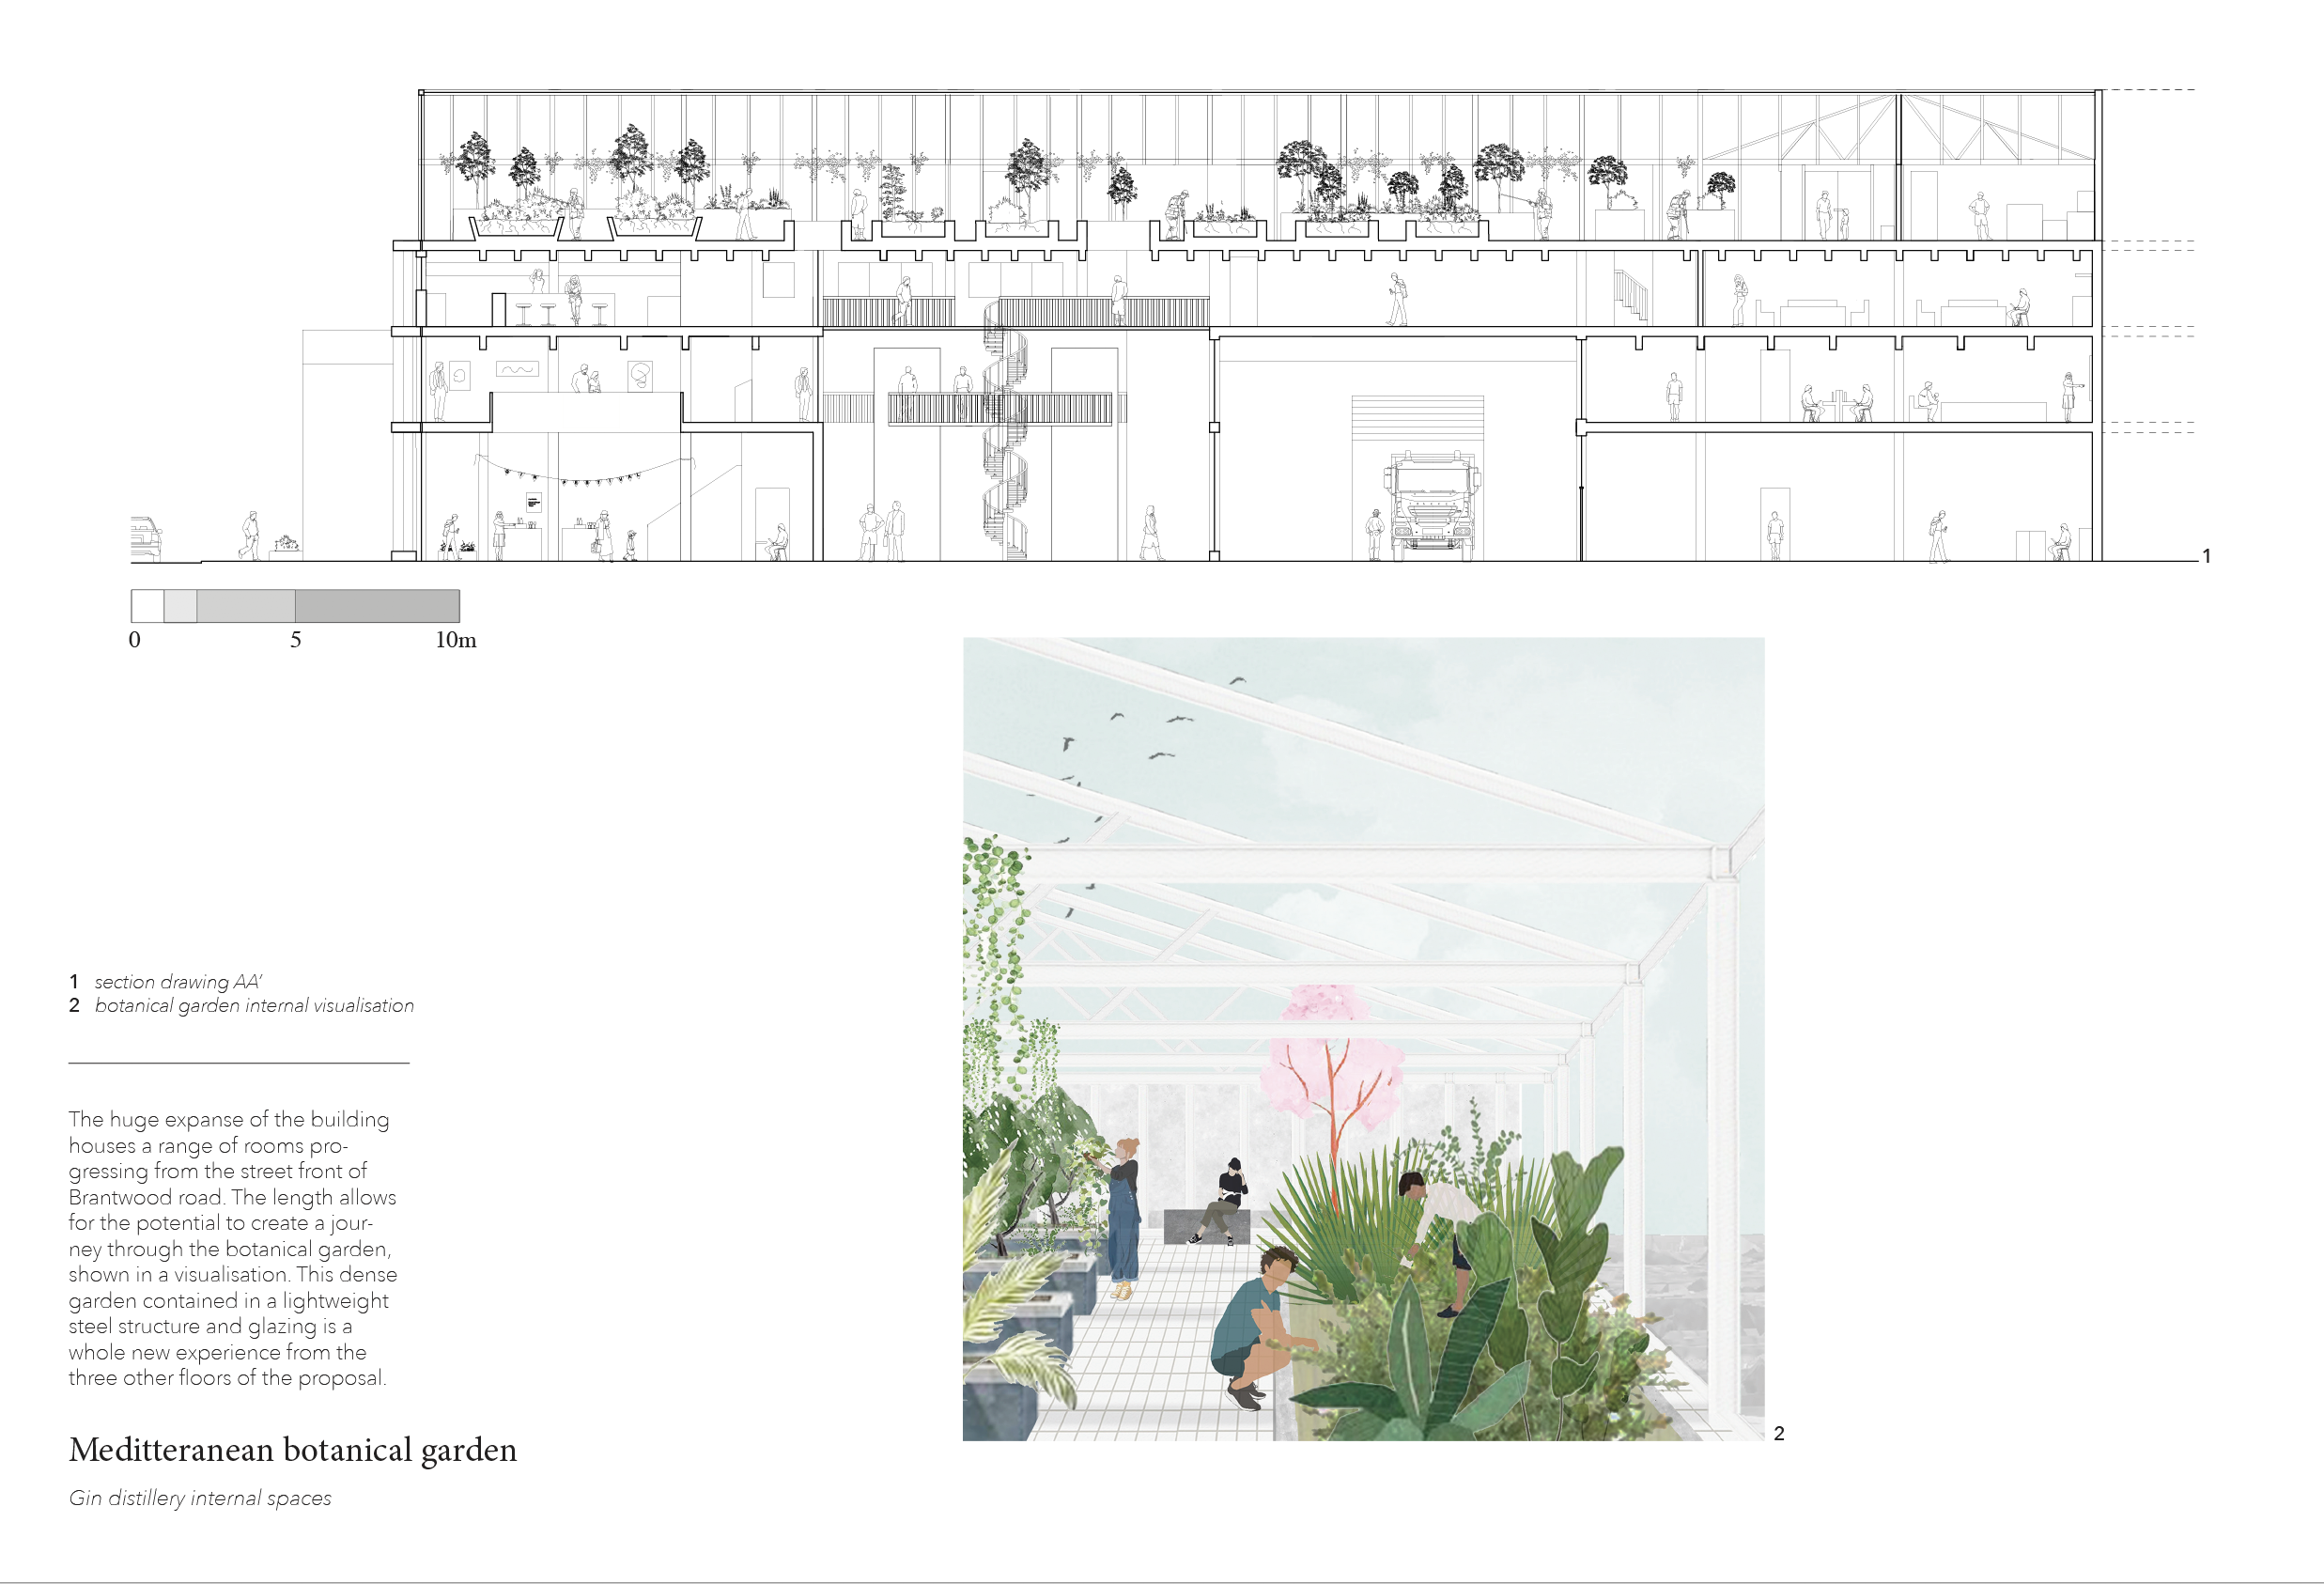 the upper part of the page shows a section displaying all functions of the gin works. The image at the bottom of the oage shows plants growing in the upper part of the building - the greenhouse